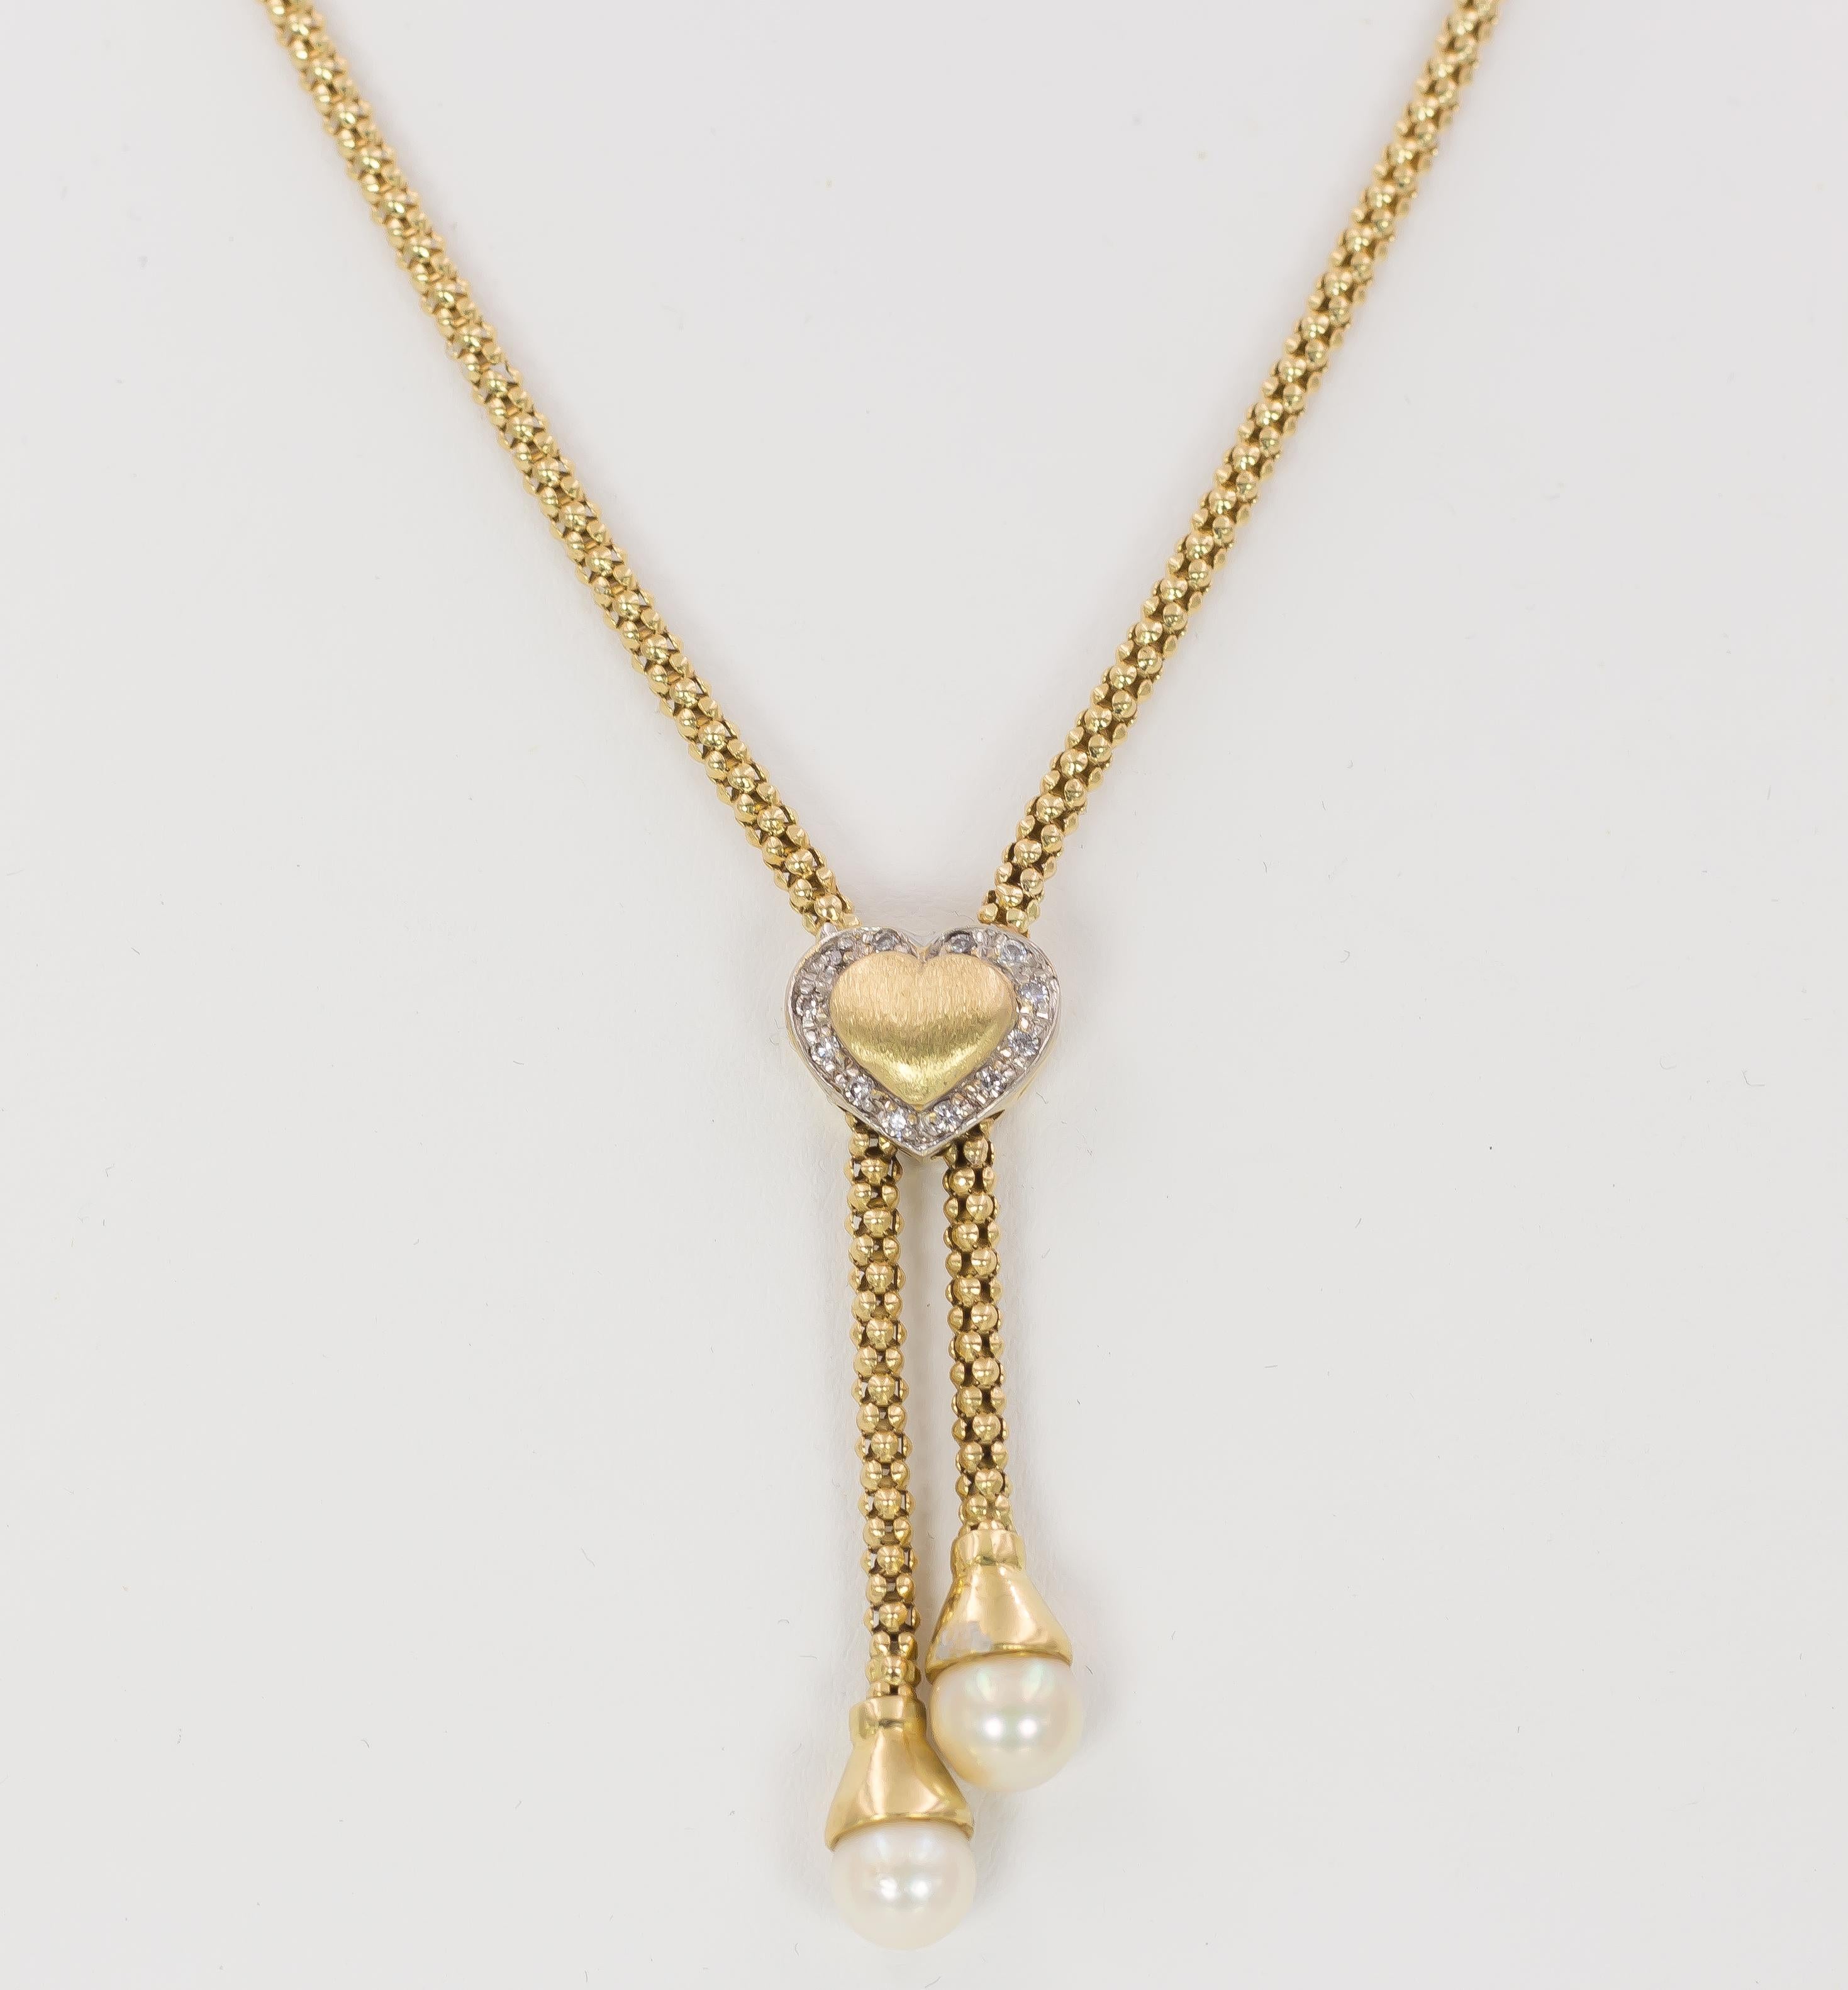 A lovely and fine vintage necklace, dating from the 1960s: the chain is crafted in 18K gold throughout and it is decorated with a central heart, that locks the chain; the heart is golden and its outer borders are decorated with zircons. The endings